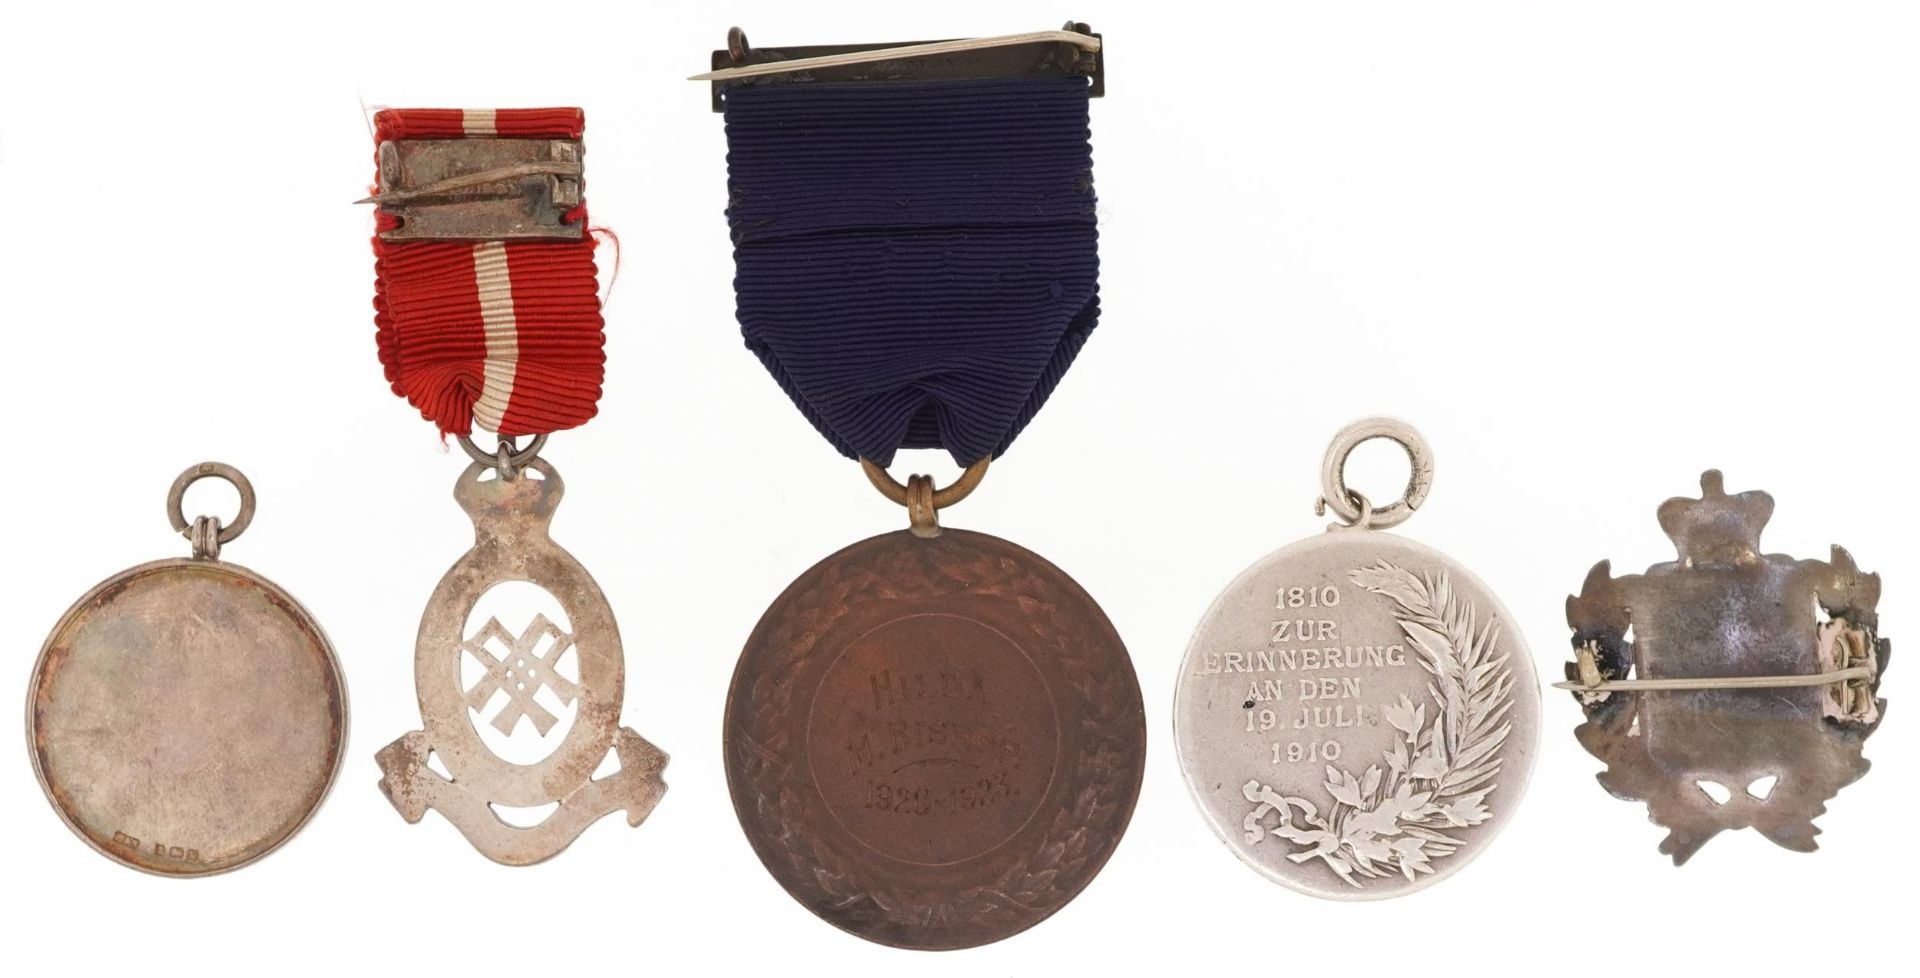 Boxed silver poultry medal and other medals and badges including a St Marylebone infirmary for Hilda - Bild 3 aus 3